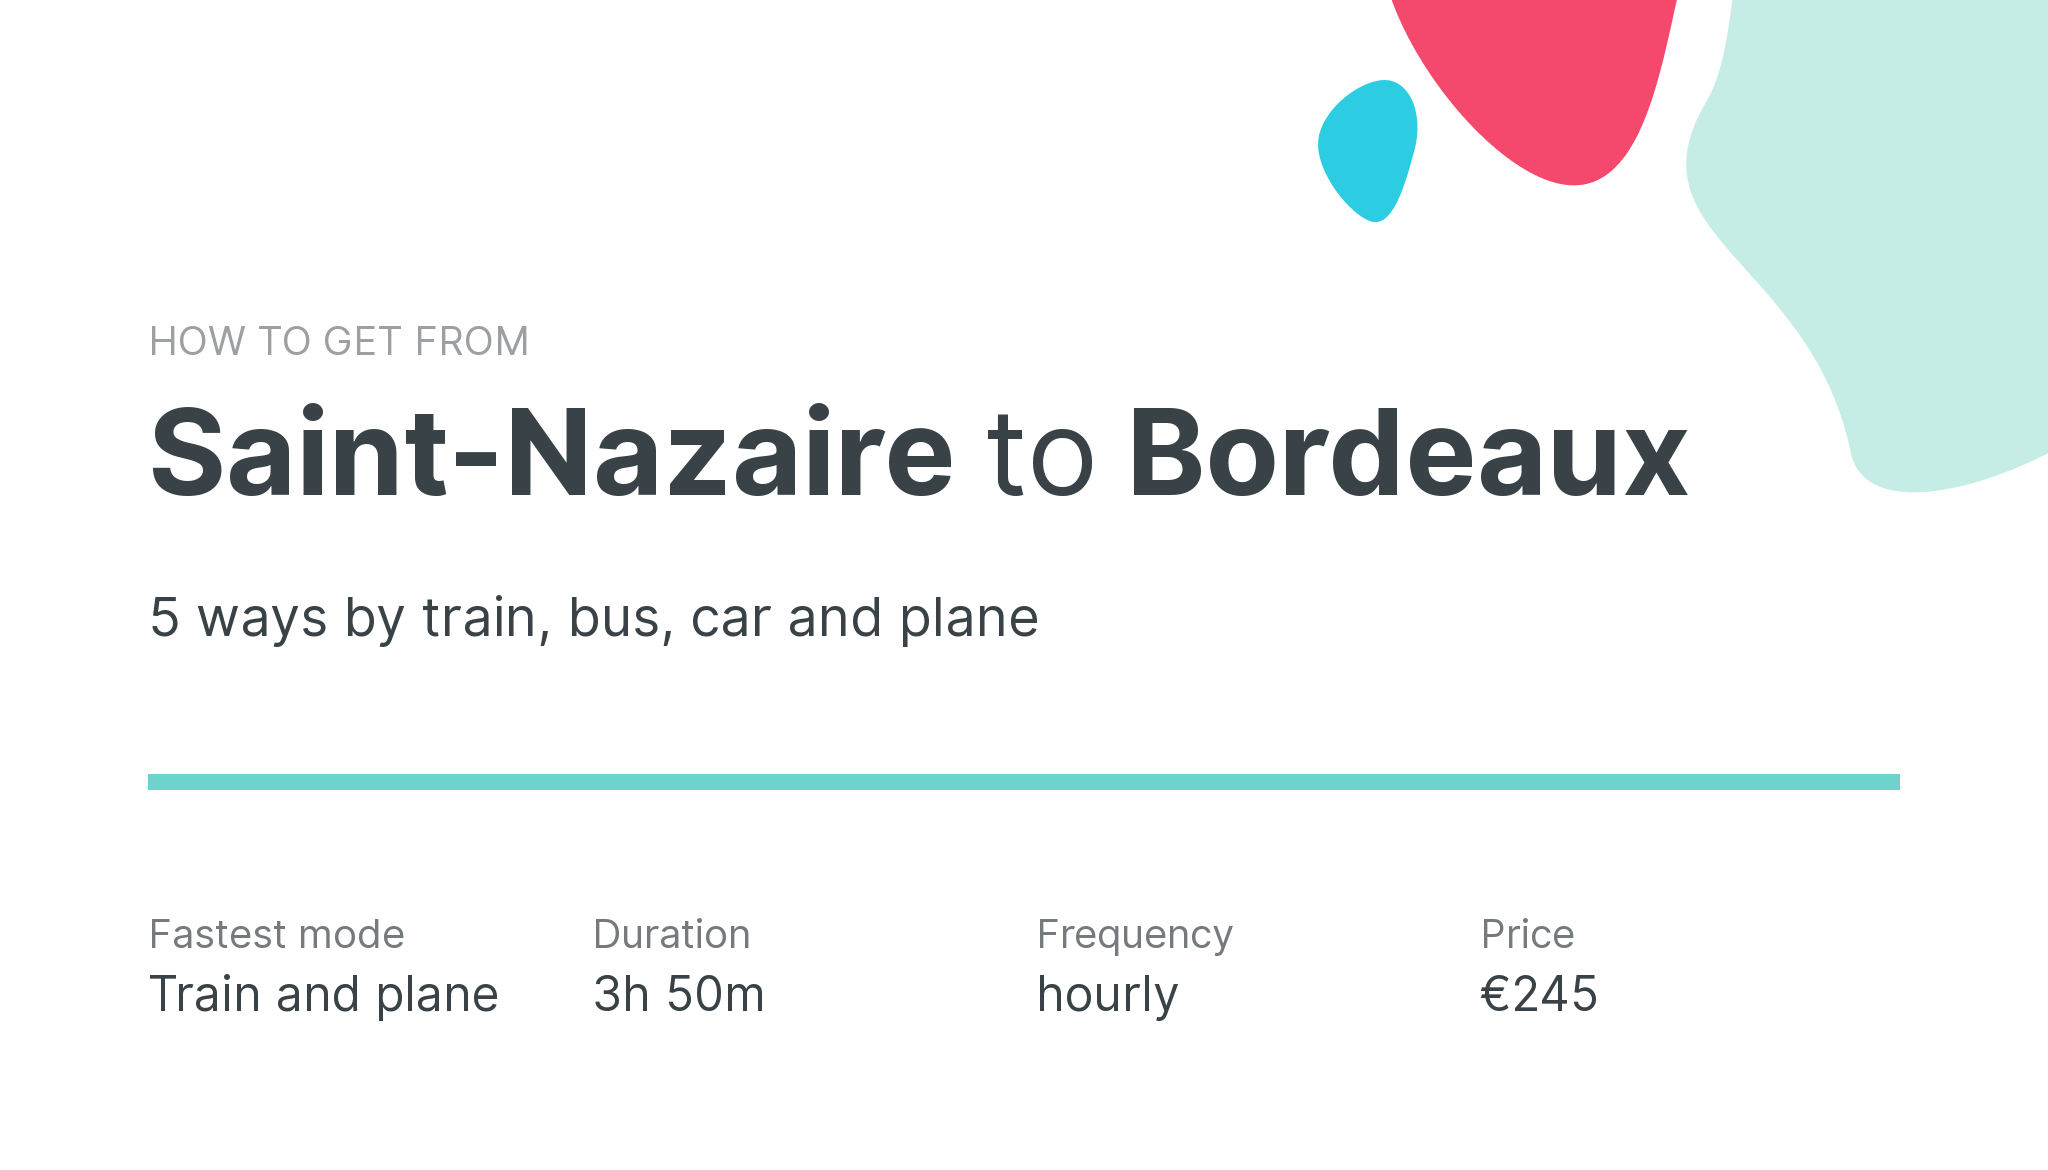 How do I get from Saint-Nazaire to Bordeaux